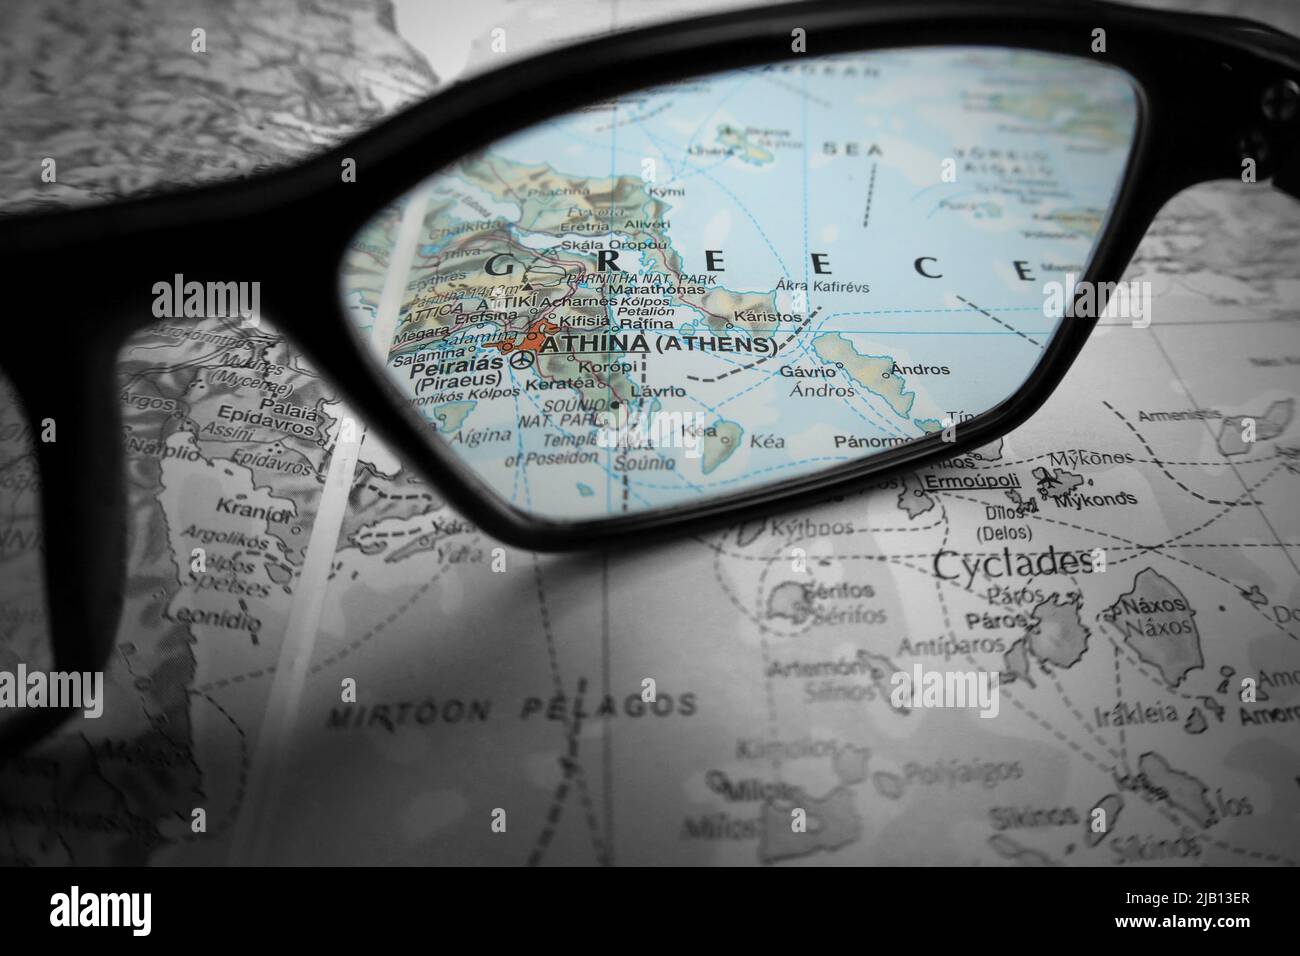 An creative illustrative image showing the country of Greece and city of Athens on a map through the lens of reading glasses. Stock Photo